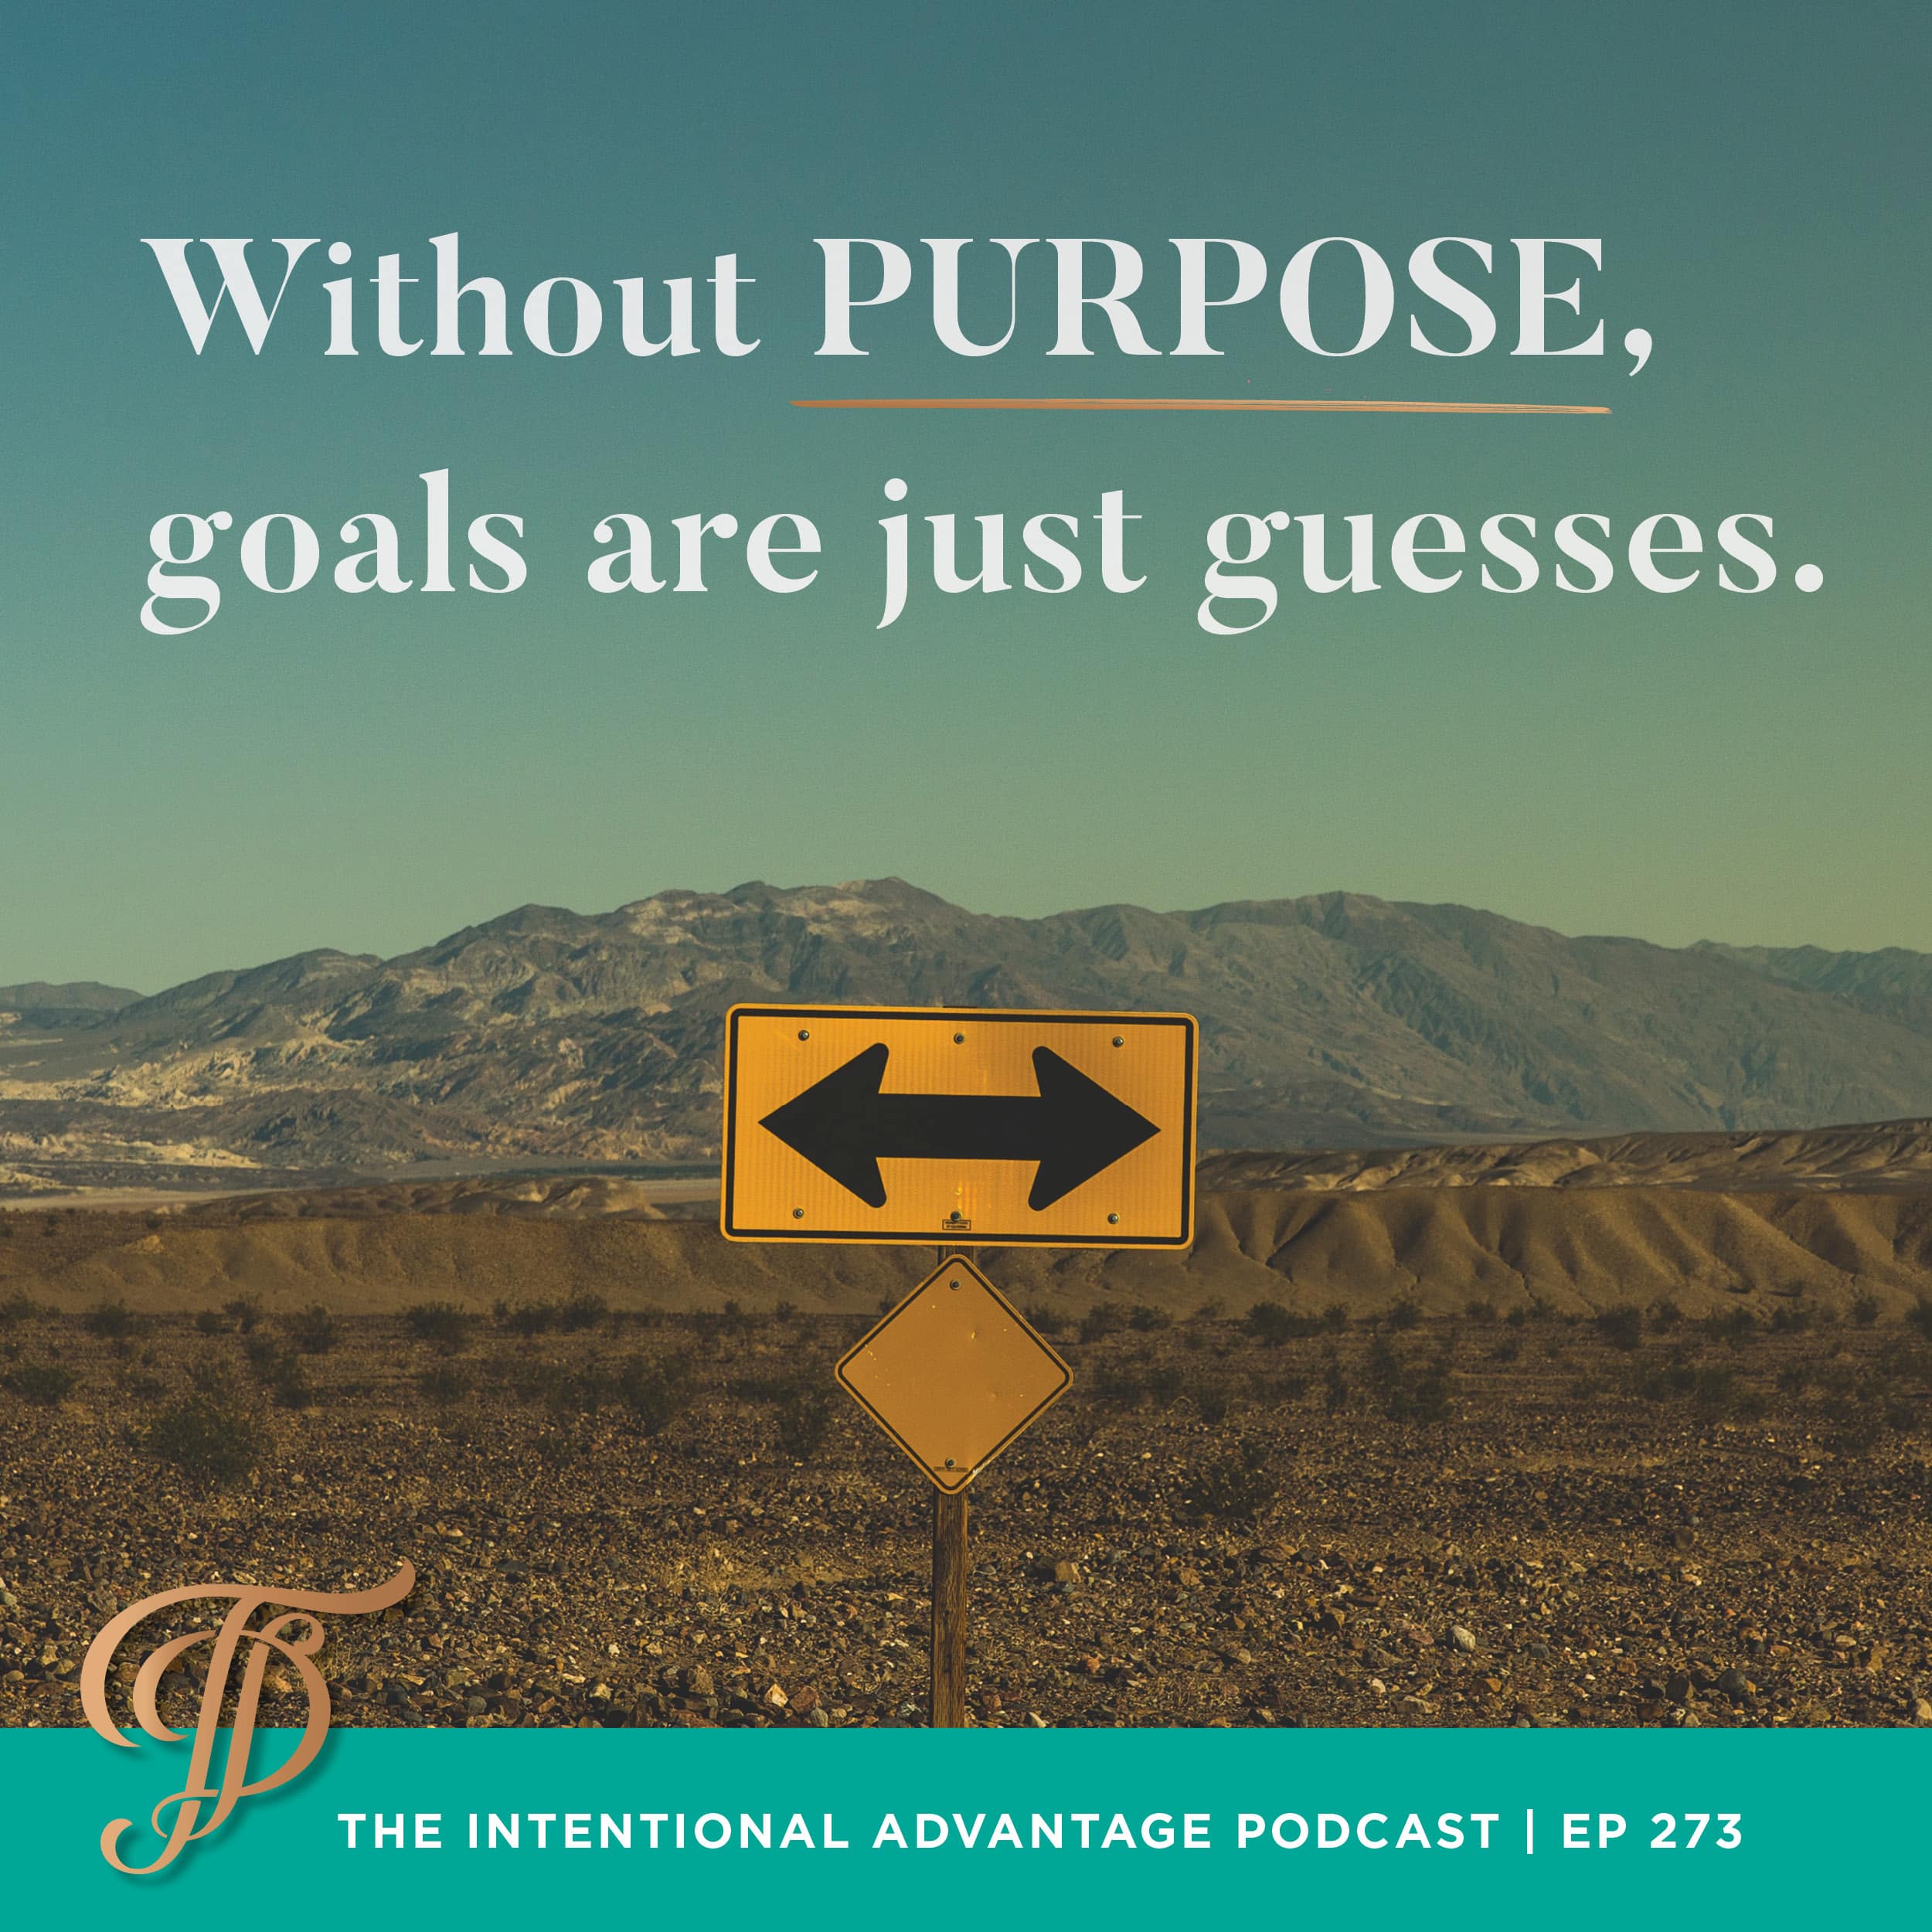 Tanya Dalton Productivity Quote on goals without purpose